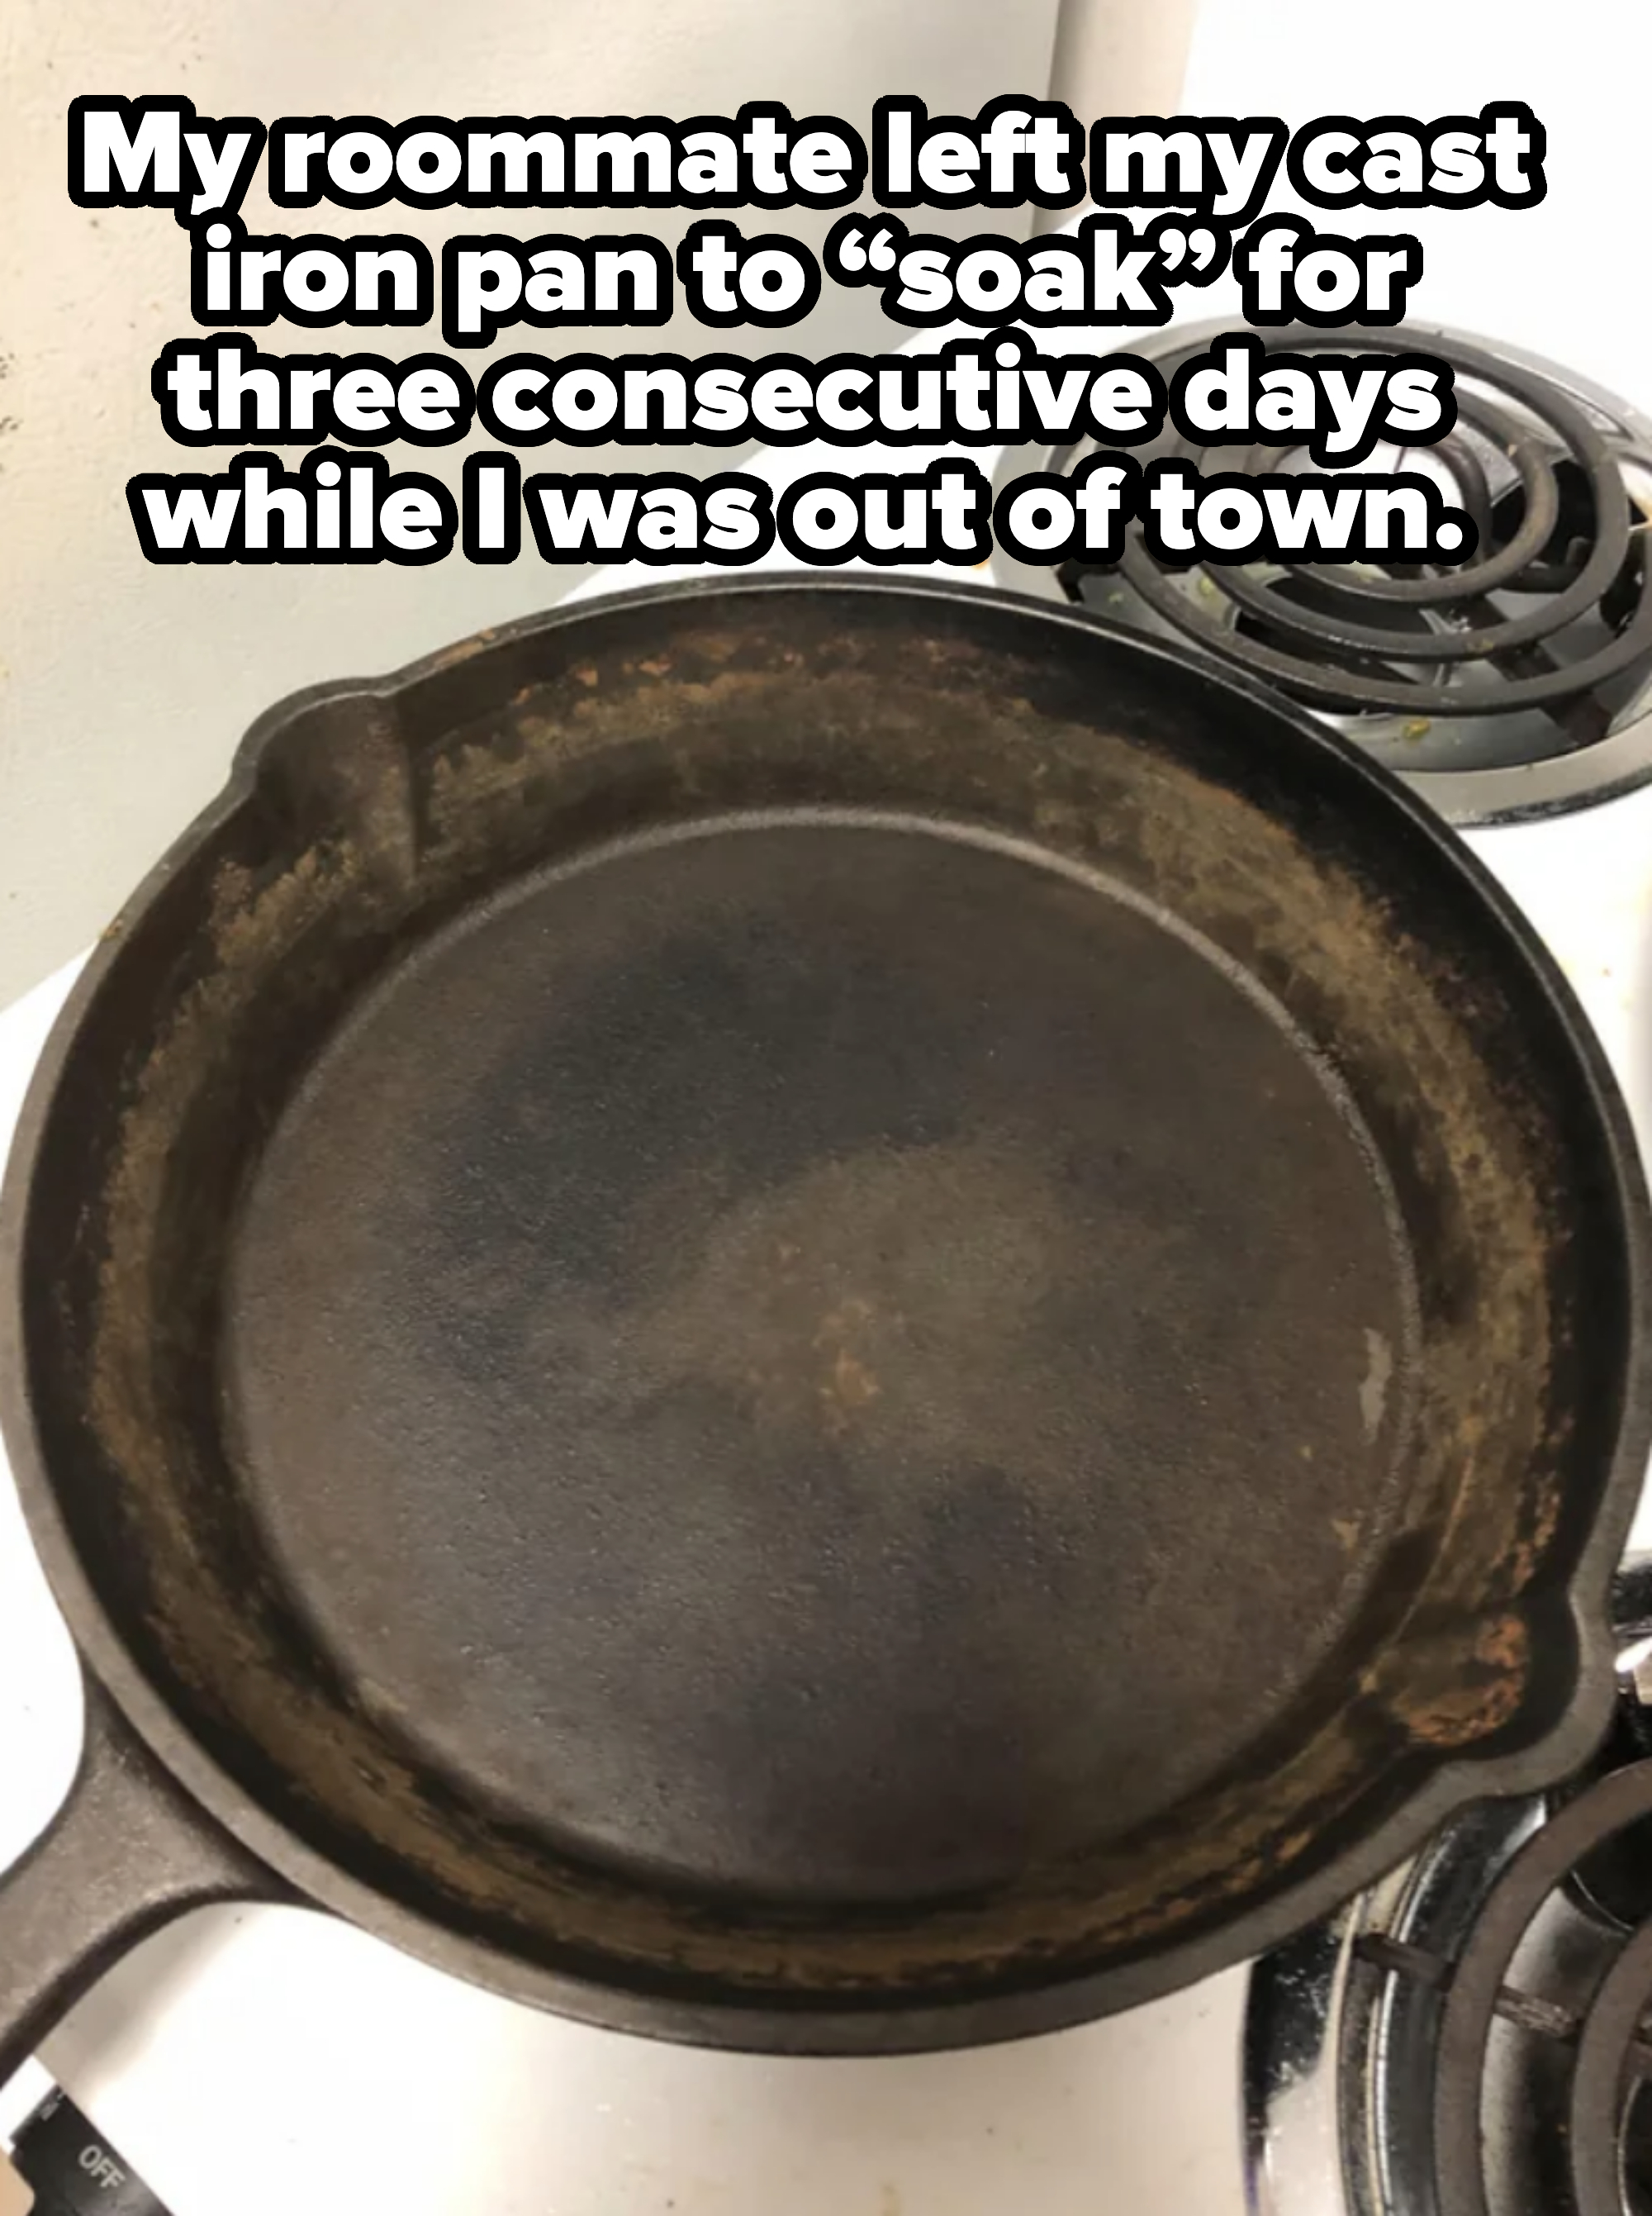 cast iron was left to soak for 3 days